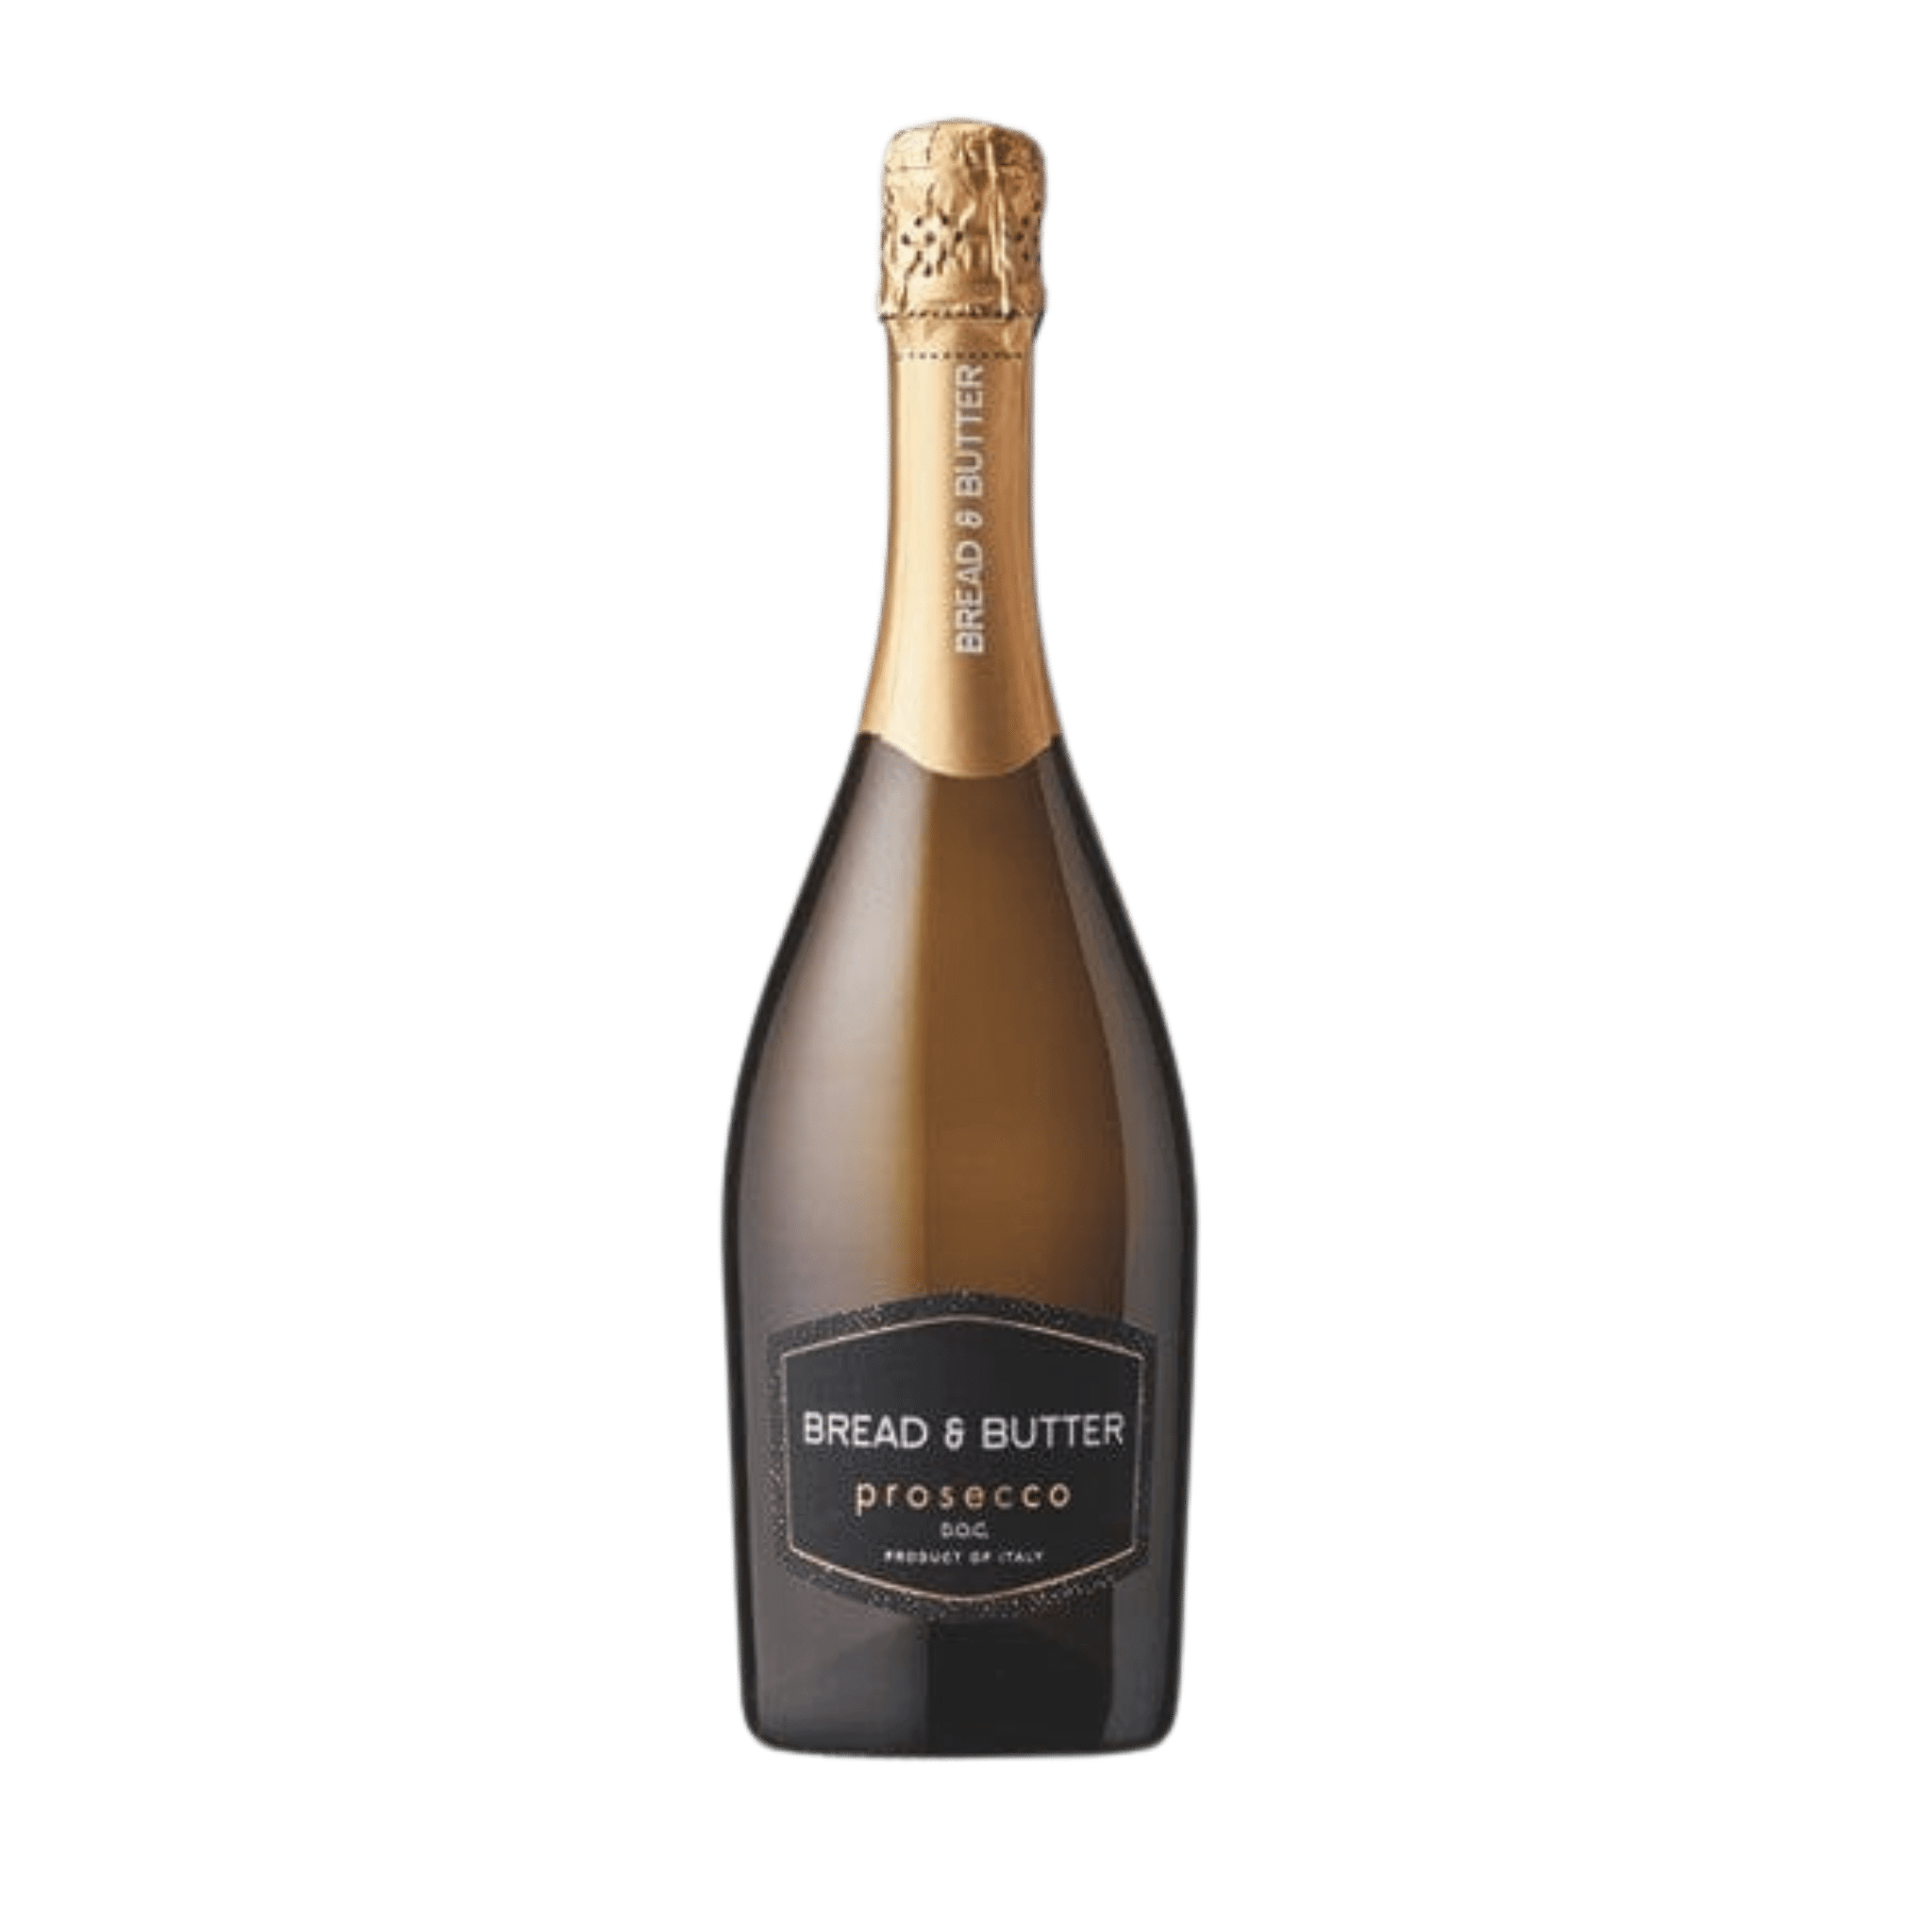 Bread and Butter Prosecco NV 750ml at ₱1899.00